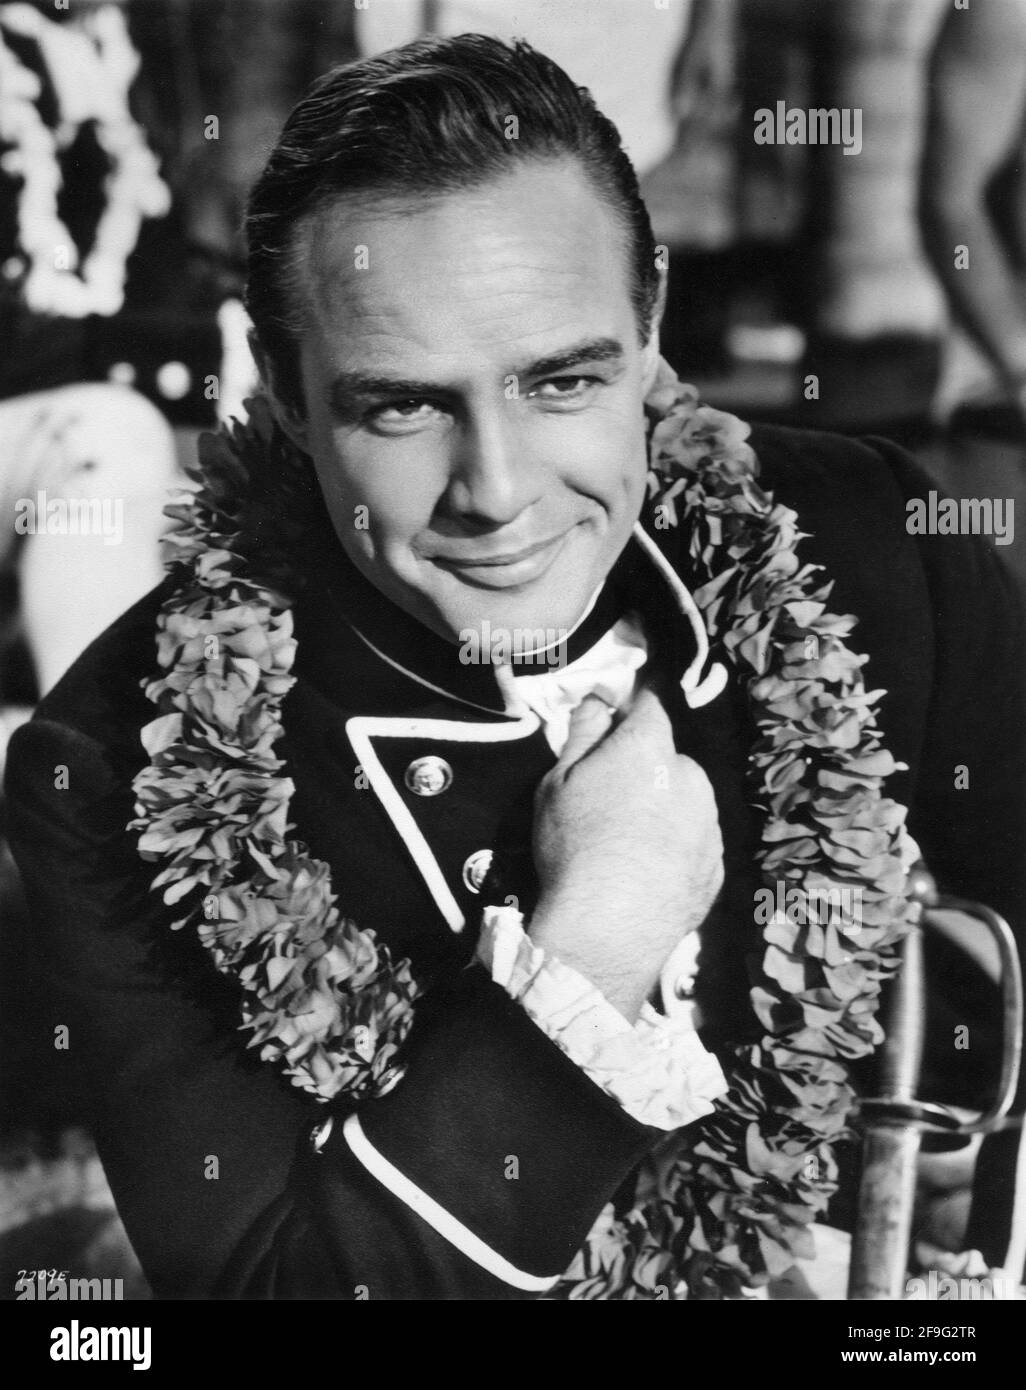 MARLON BRANDO as Fletcher Christian in MUTINY ON THE BOUNTY 1962 directors LEWIS MILESTONE and CAROL REED (uncredited) novel James Nordhoff and James Norman Hall screenplay Charles Lederer Arcola Pictures / Metro Goldwyn Mayer Stock Photo